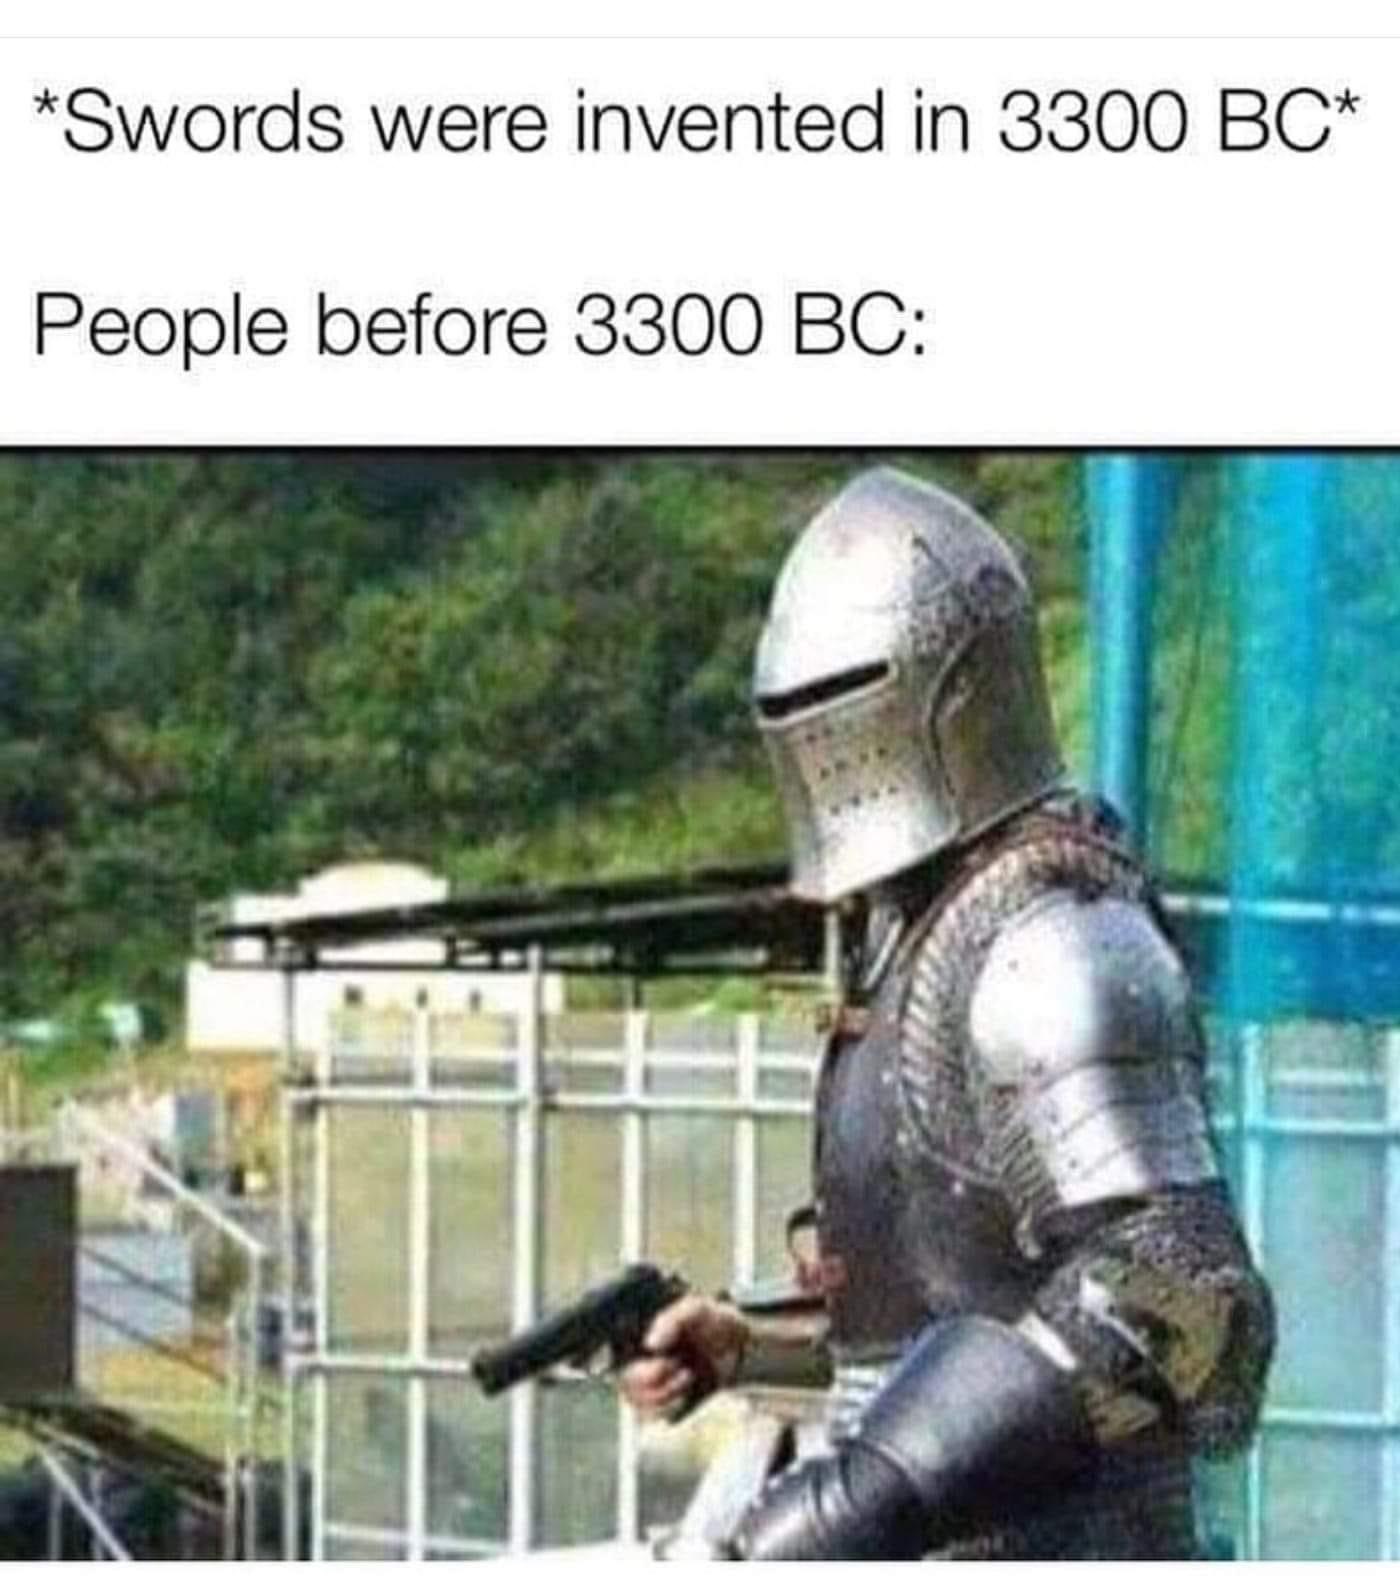 parry this you filthy casul - Swords were invented in 3300 Bc People before 3300 Bc